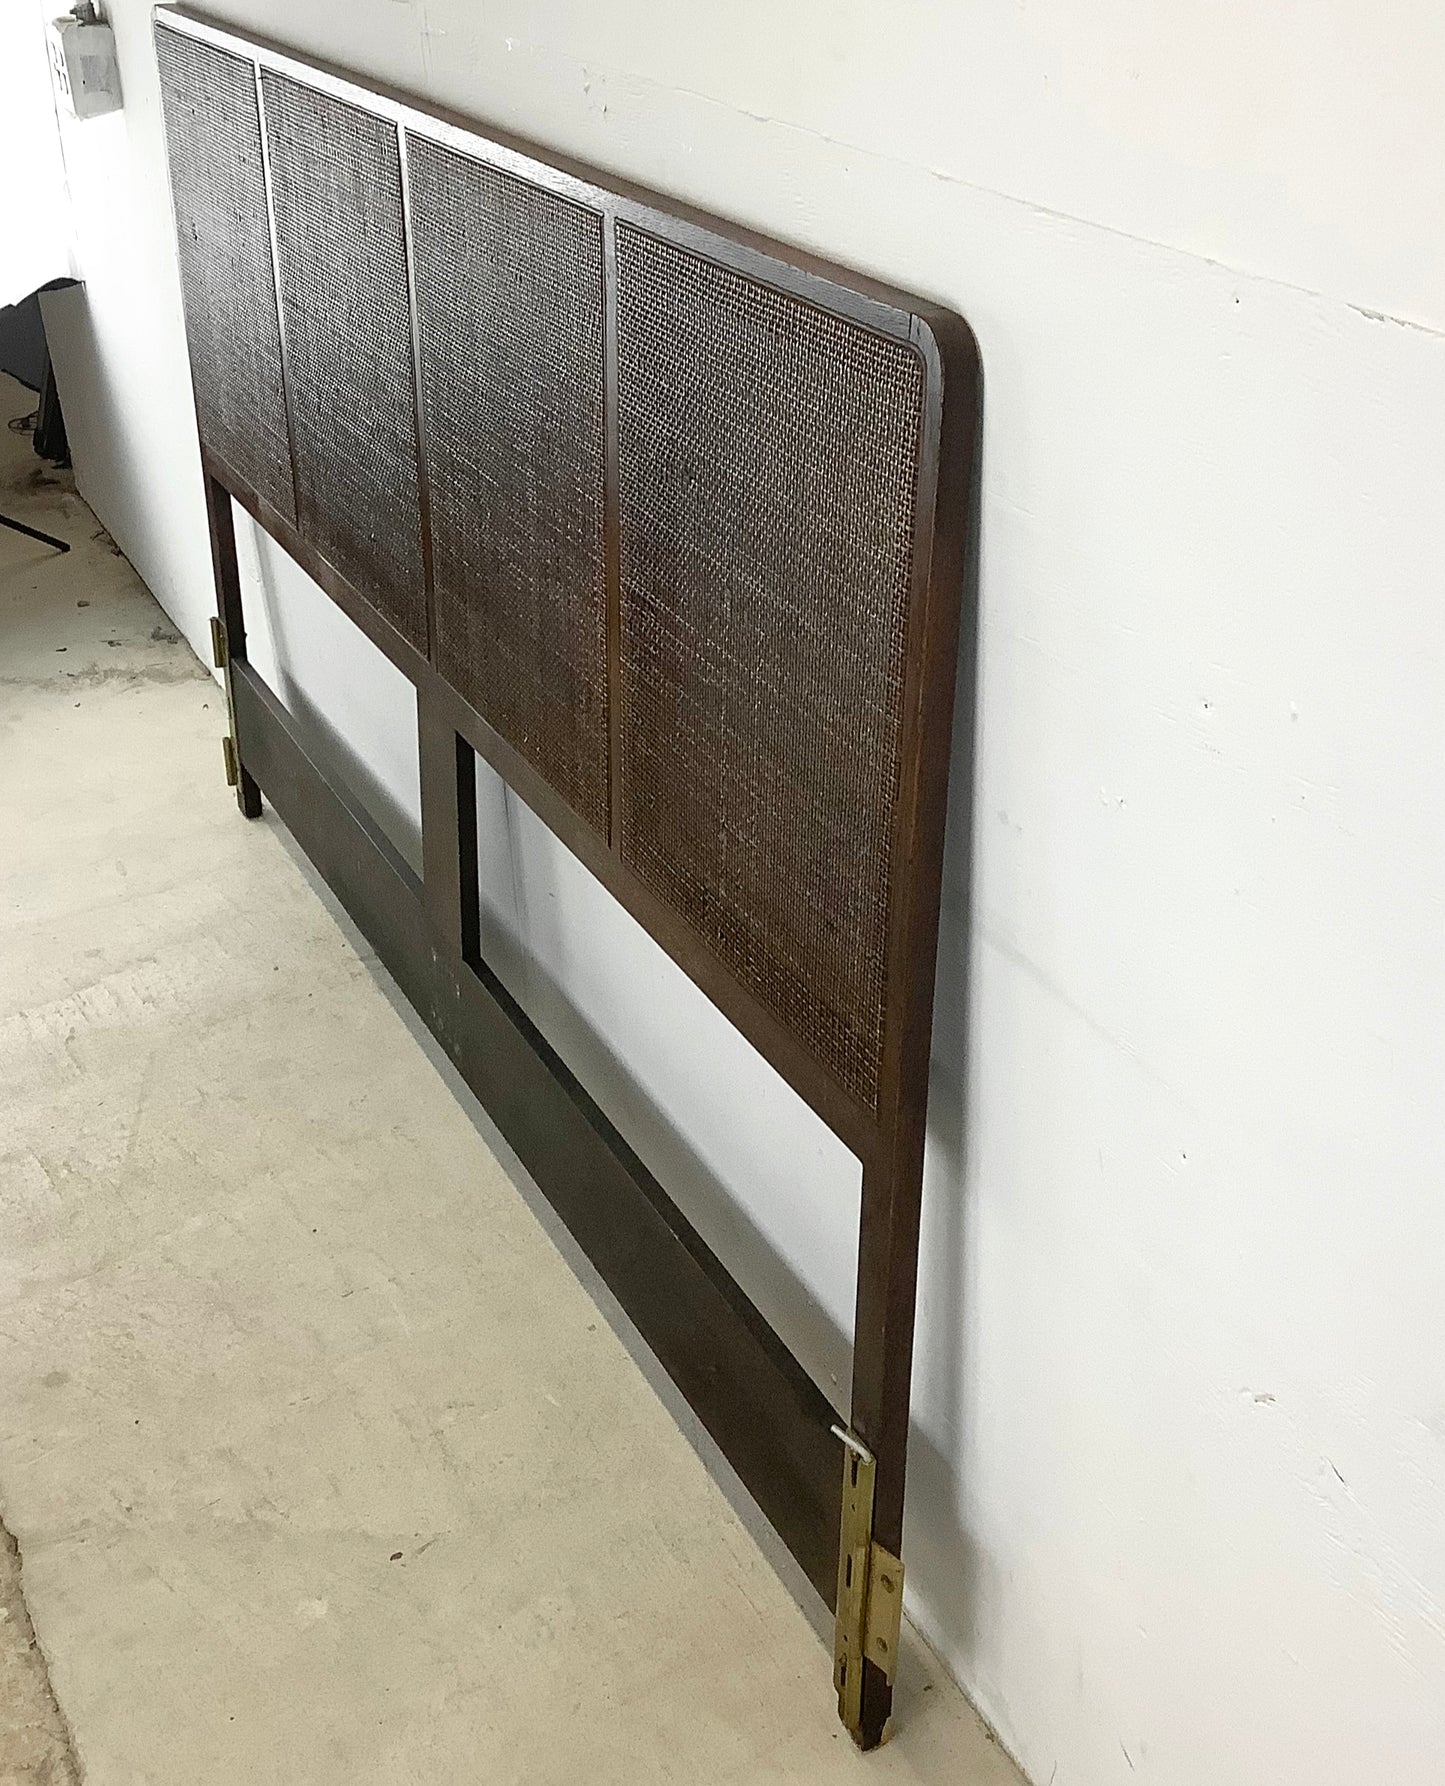 Mid-Century Cane Front Headboard- King Size